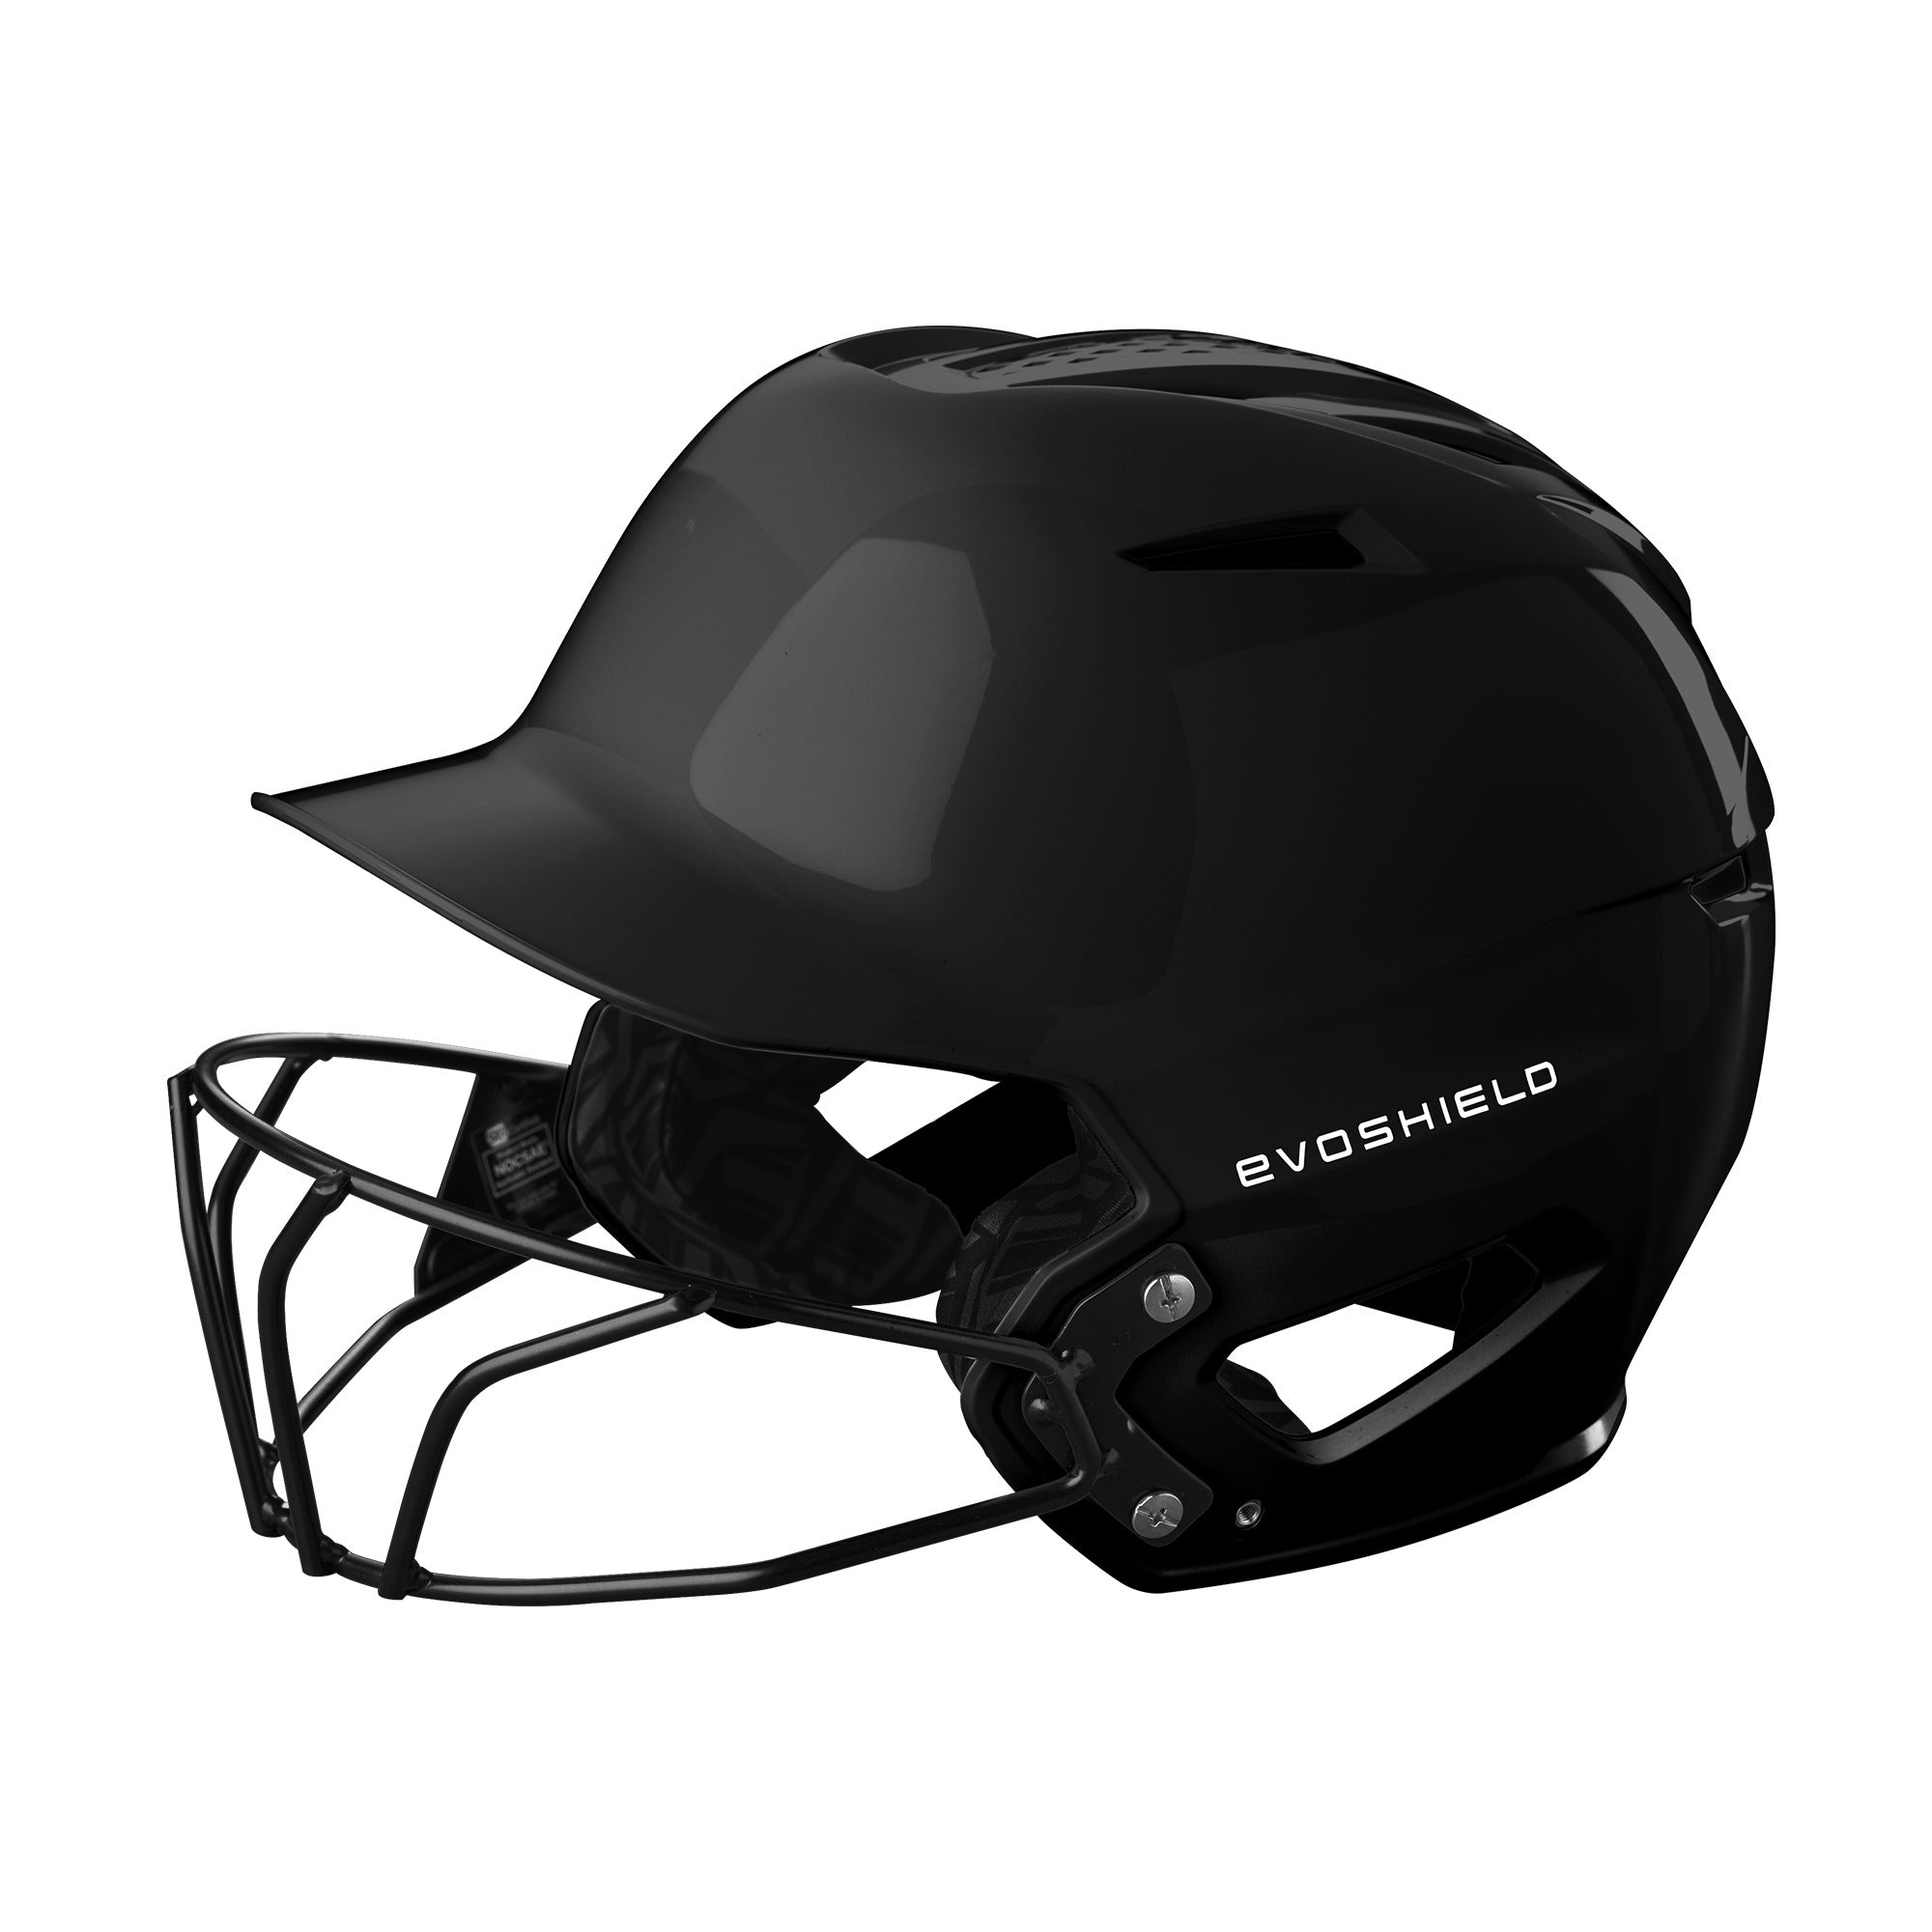 XVT 2.0 Glossy Batting Helmet With Facemask - Black